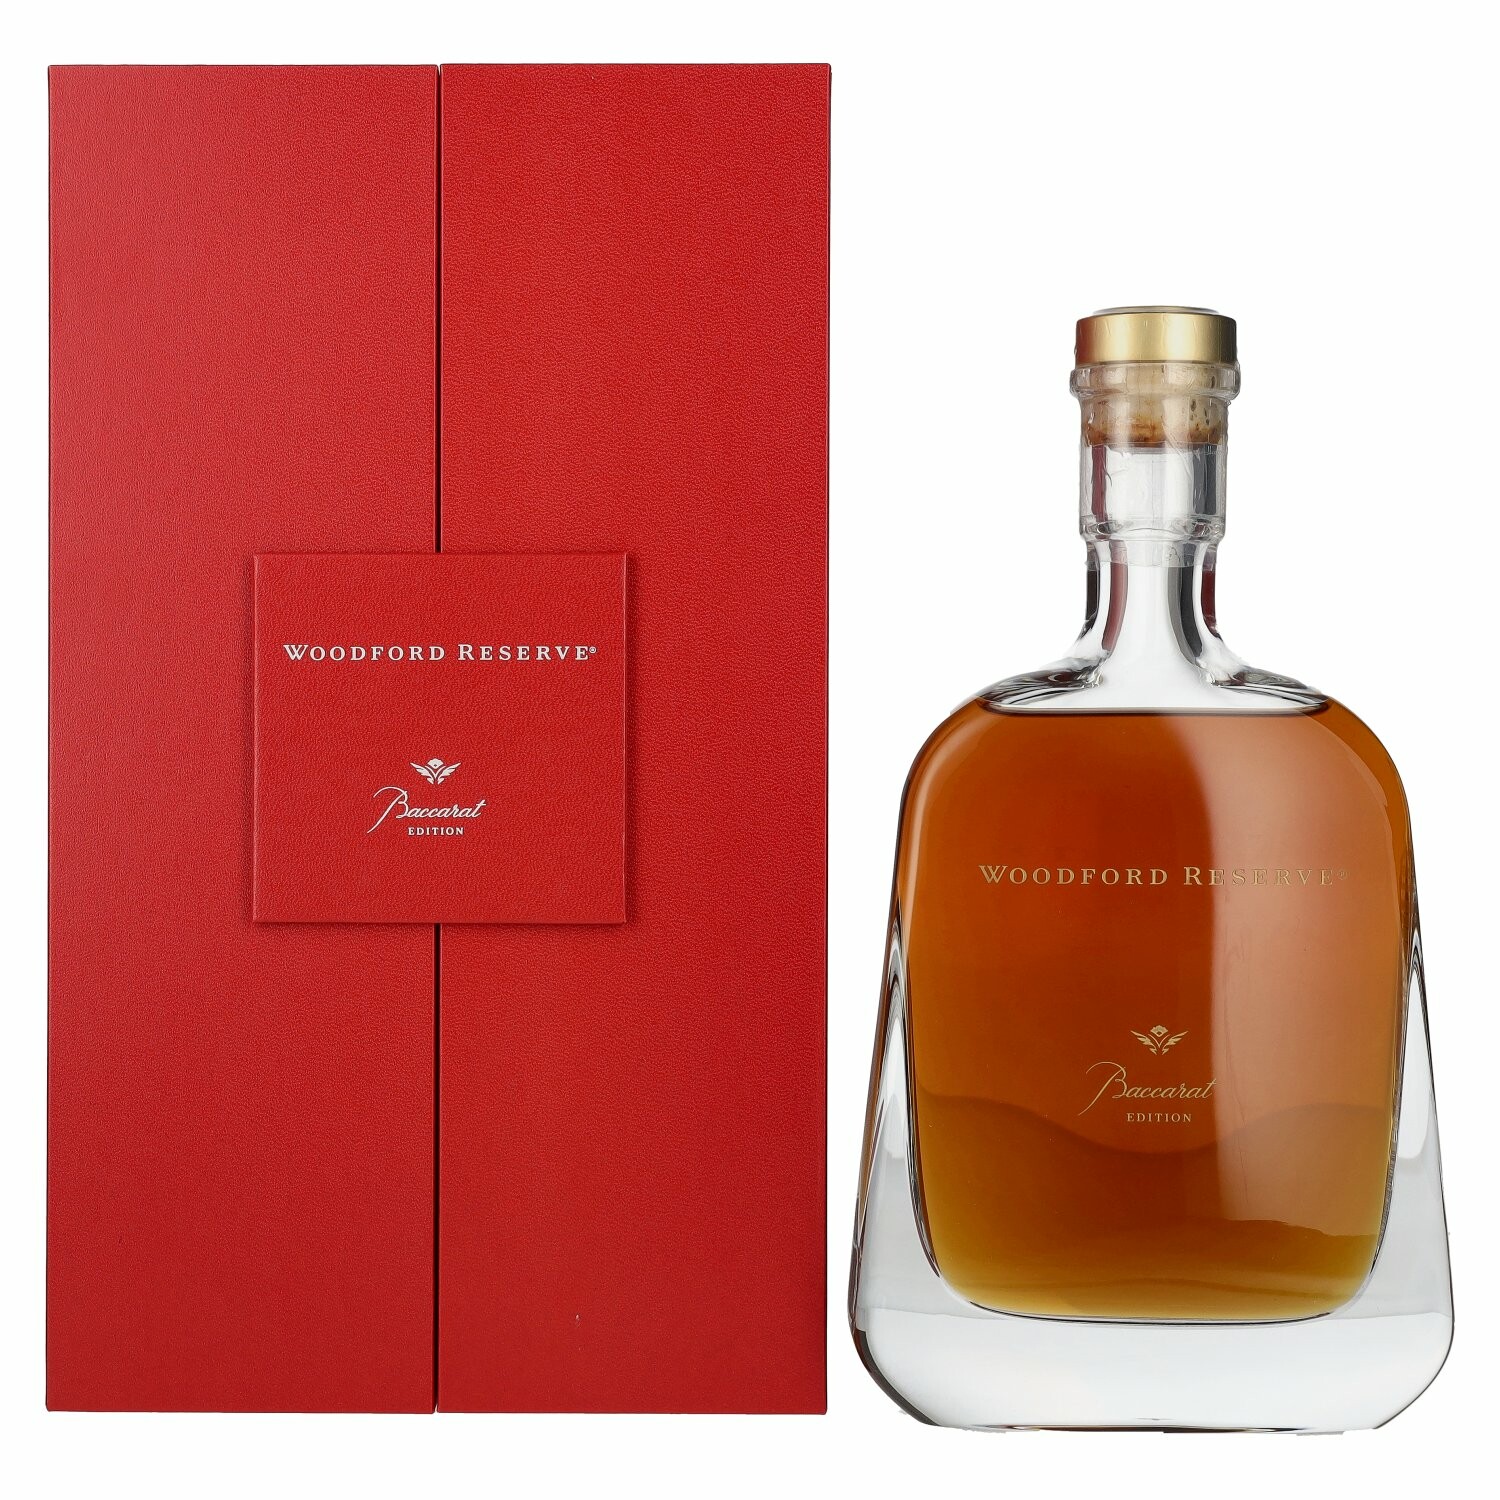 Woodford Reserve BACCARAT Edition 45,2% Vol. 0,7l in Giftbox